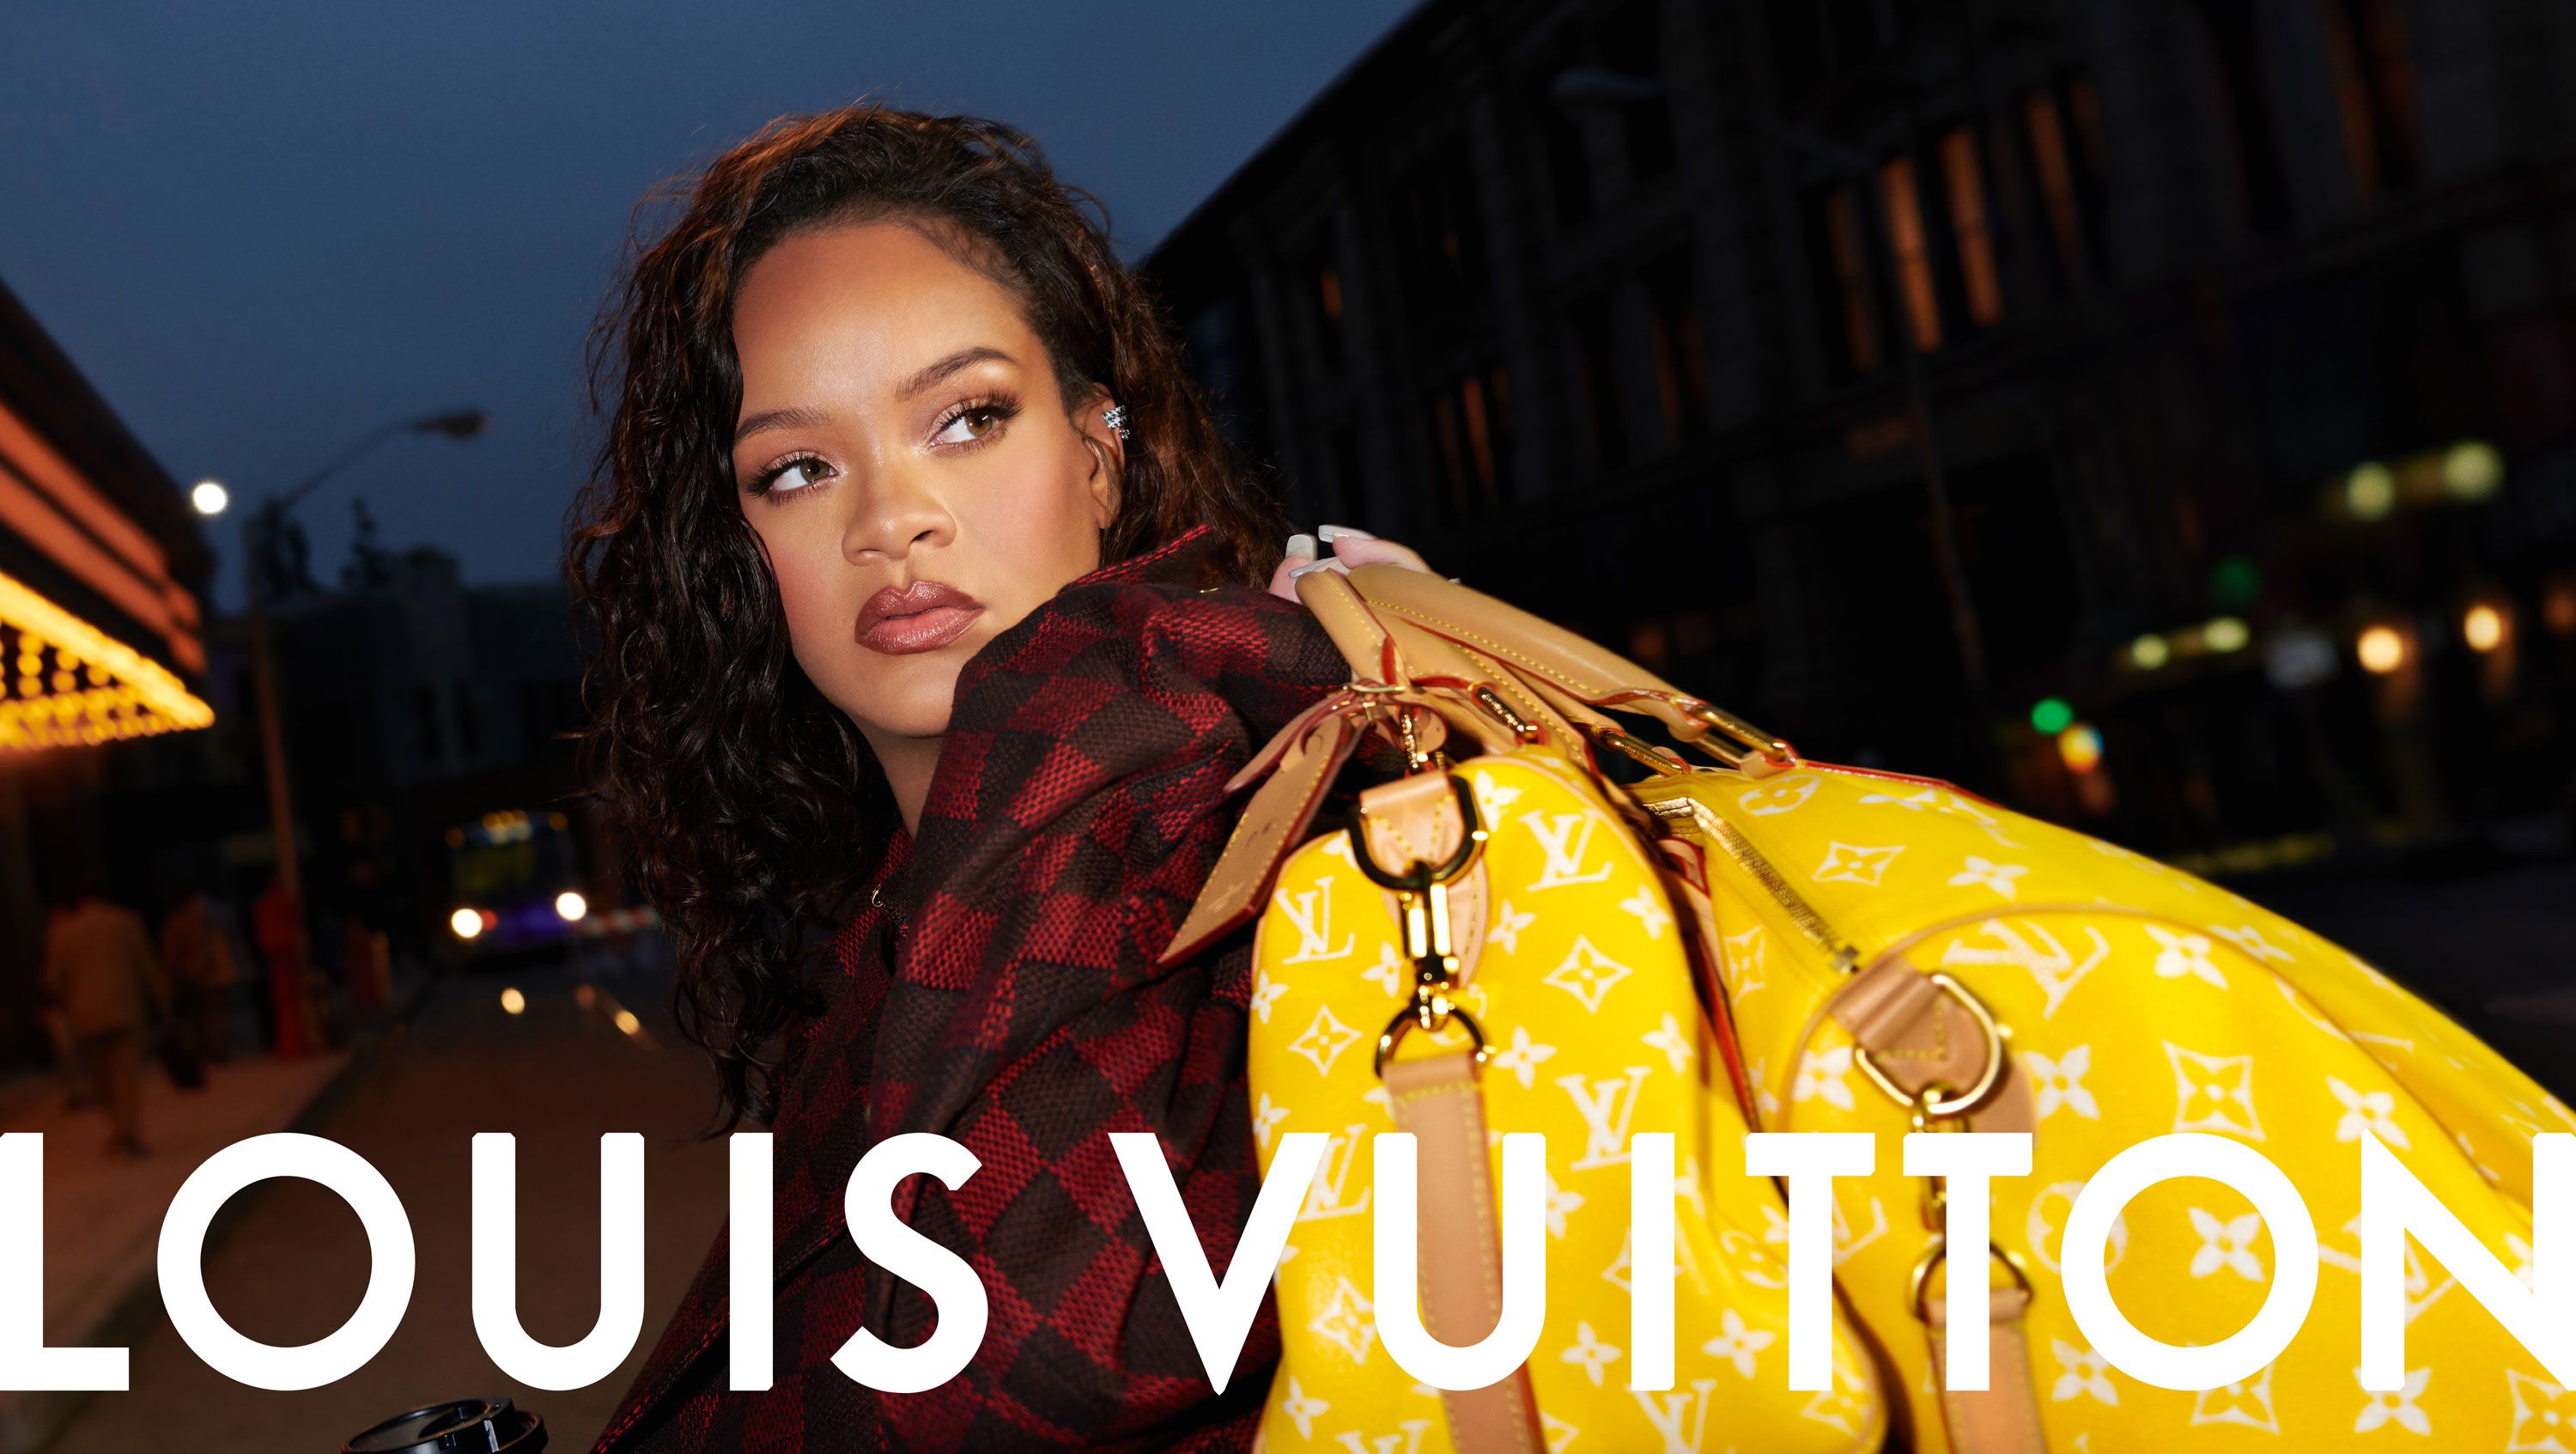 Rihanna Is Developing a Fashion Line for LVMH